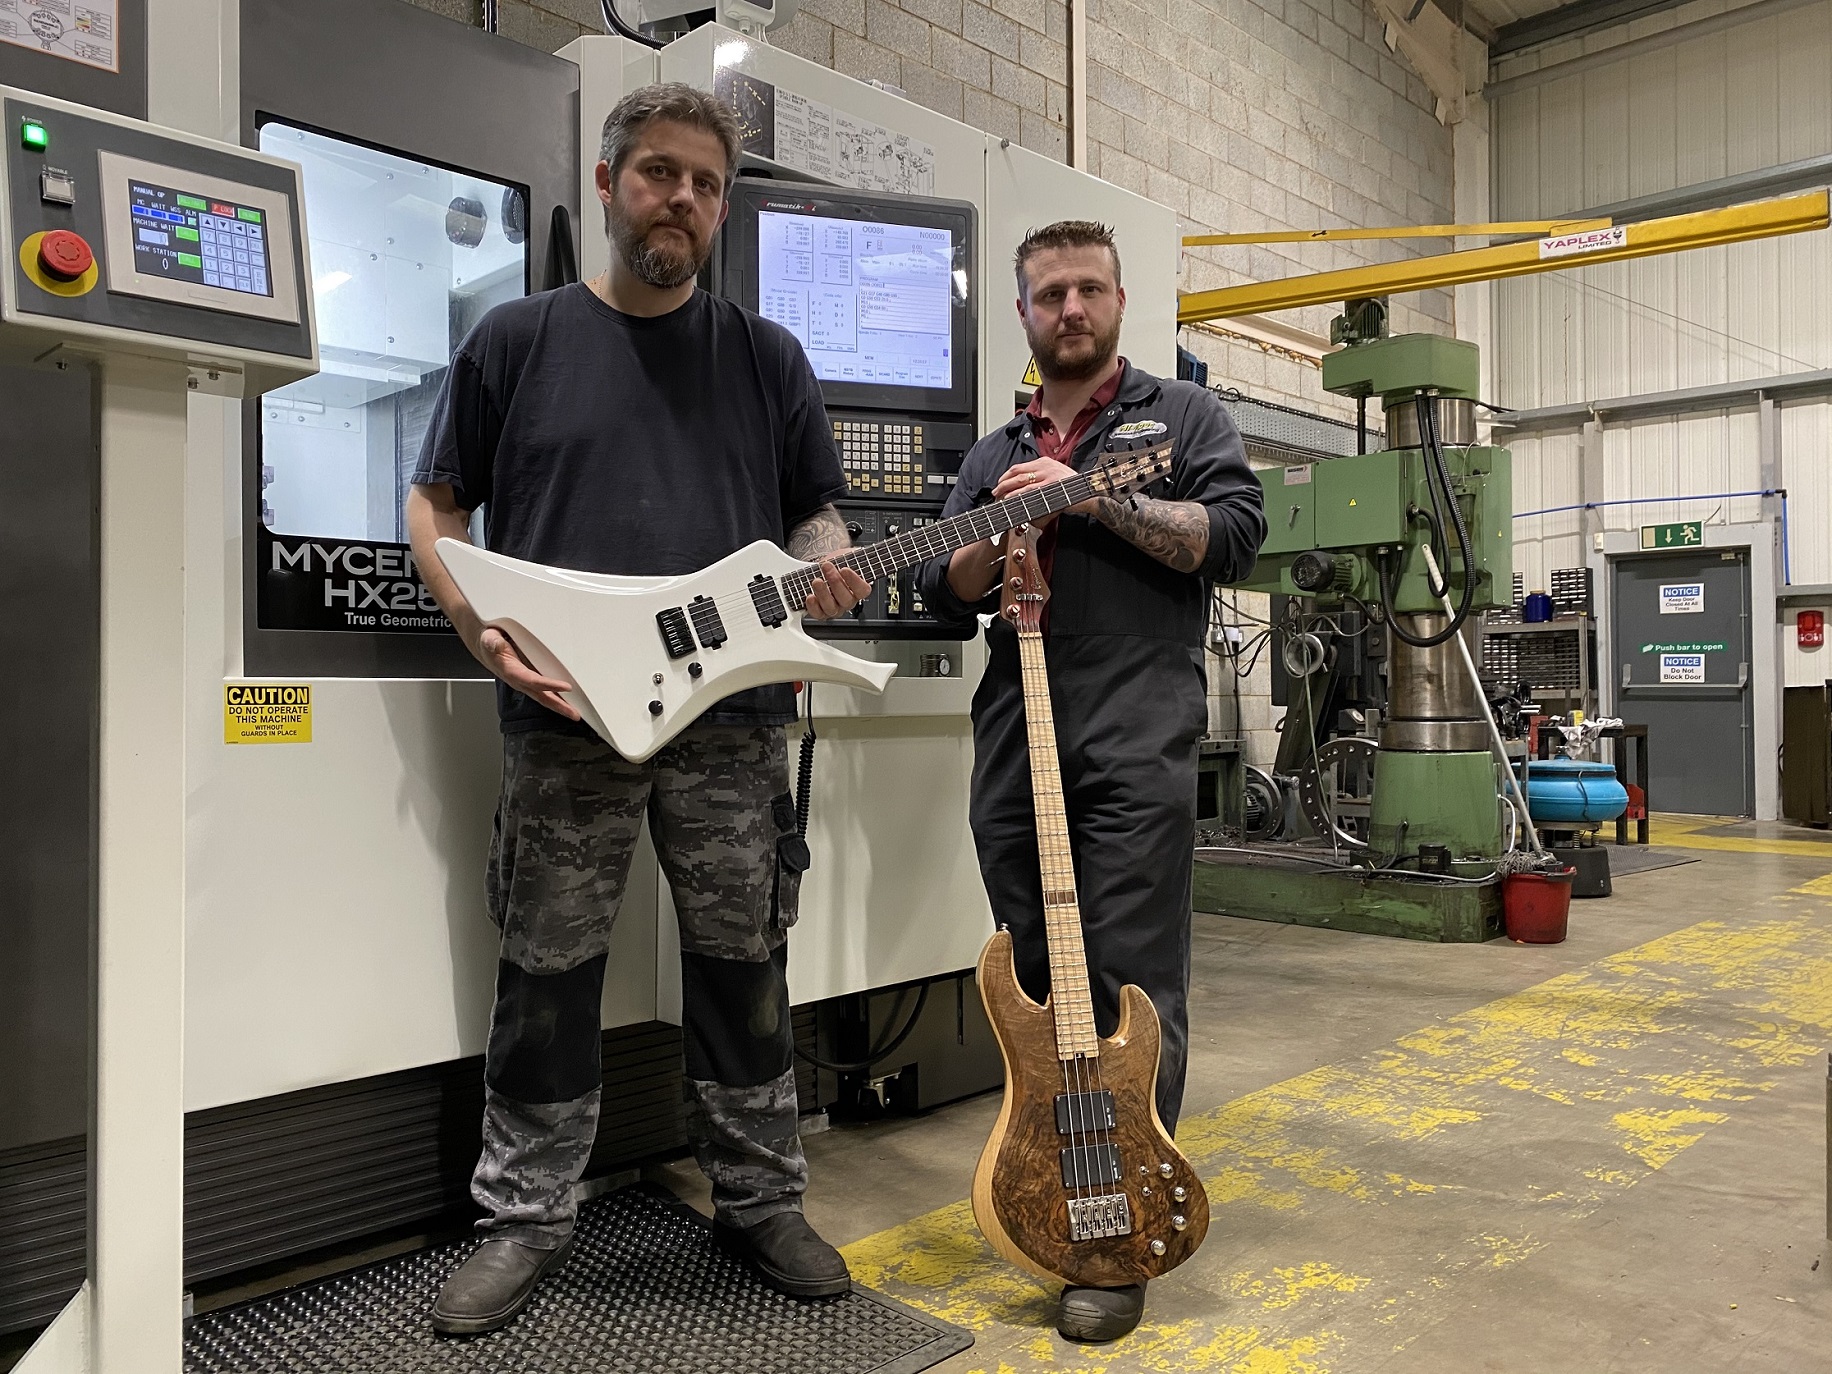 GUITAR MANUFACTURE IS TUNED INTO FIVE-AXIS PRODUCTIVITY WITH HYPERMILL FROM OPEN MIND